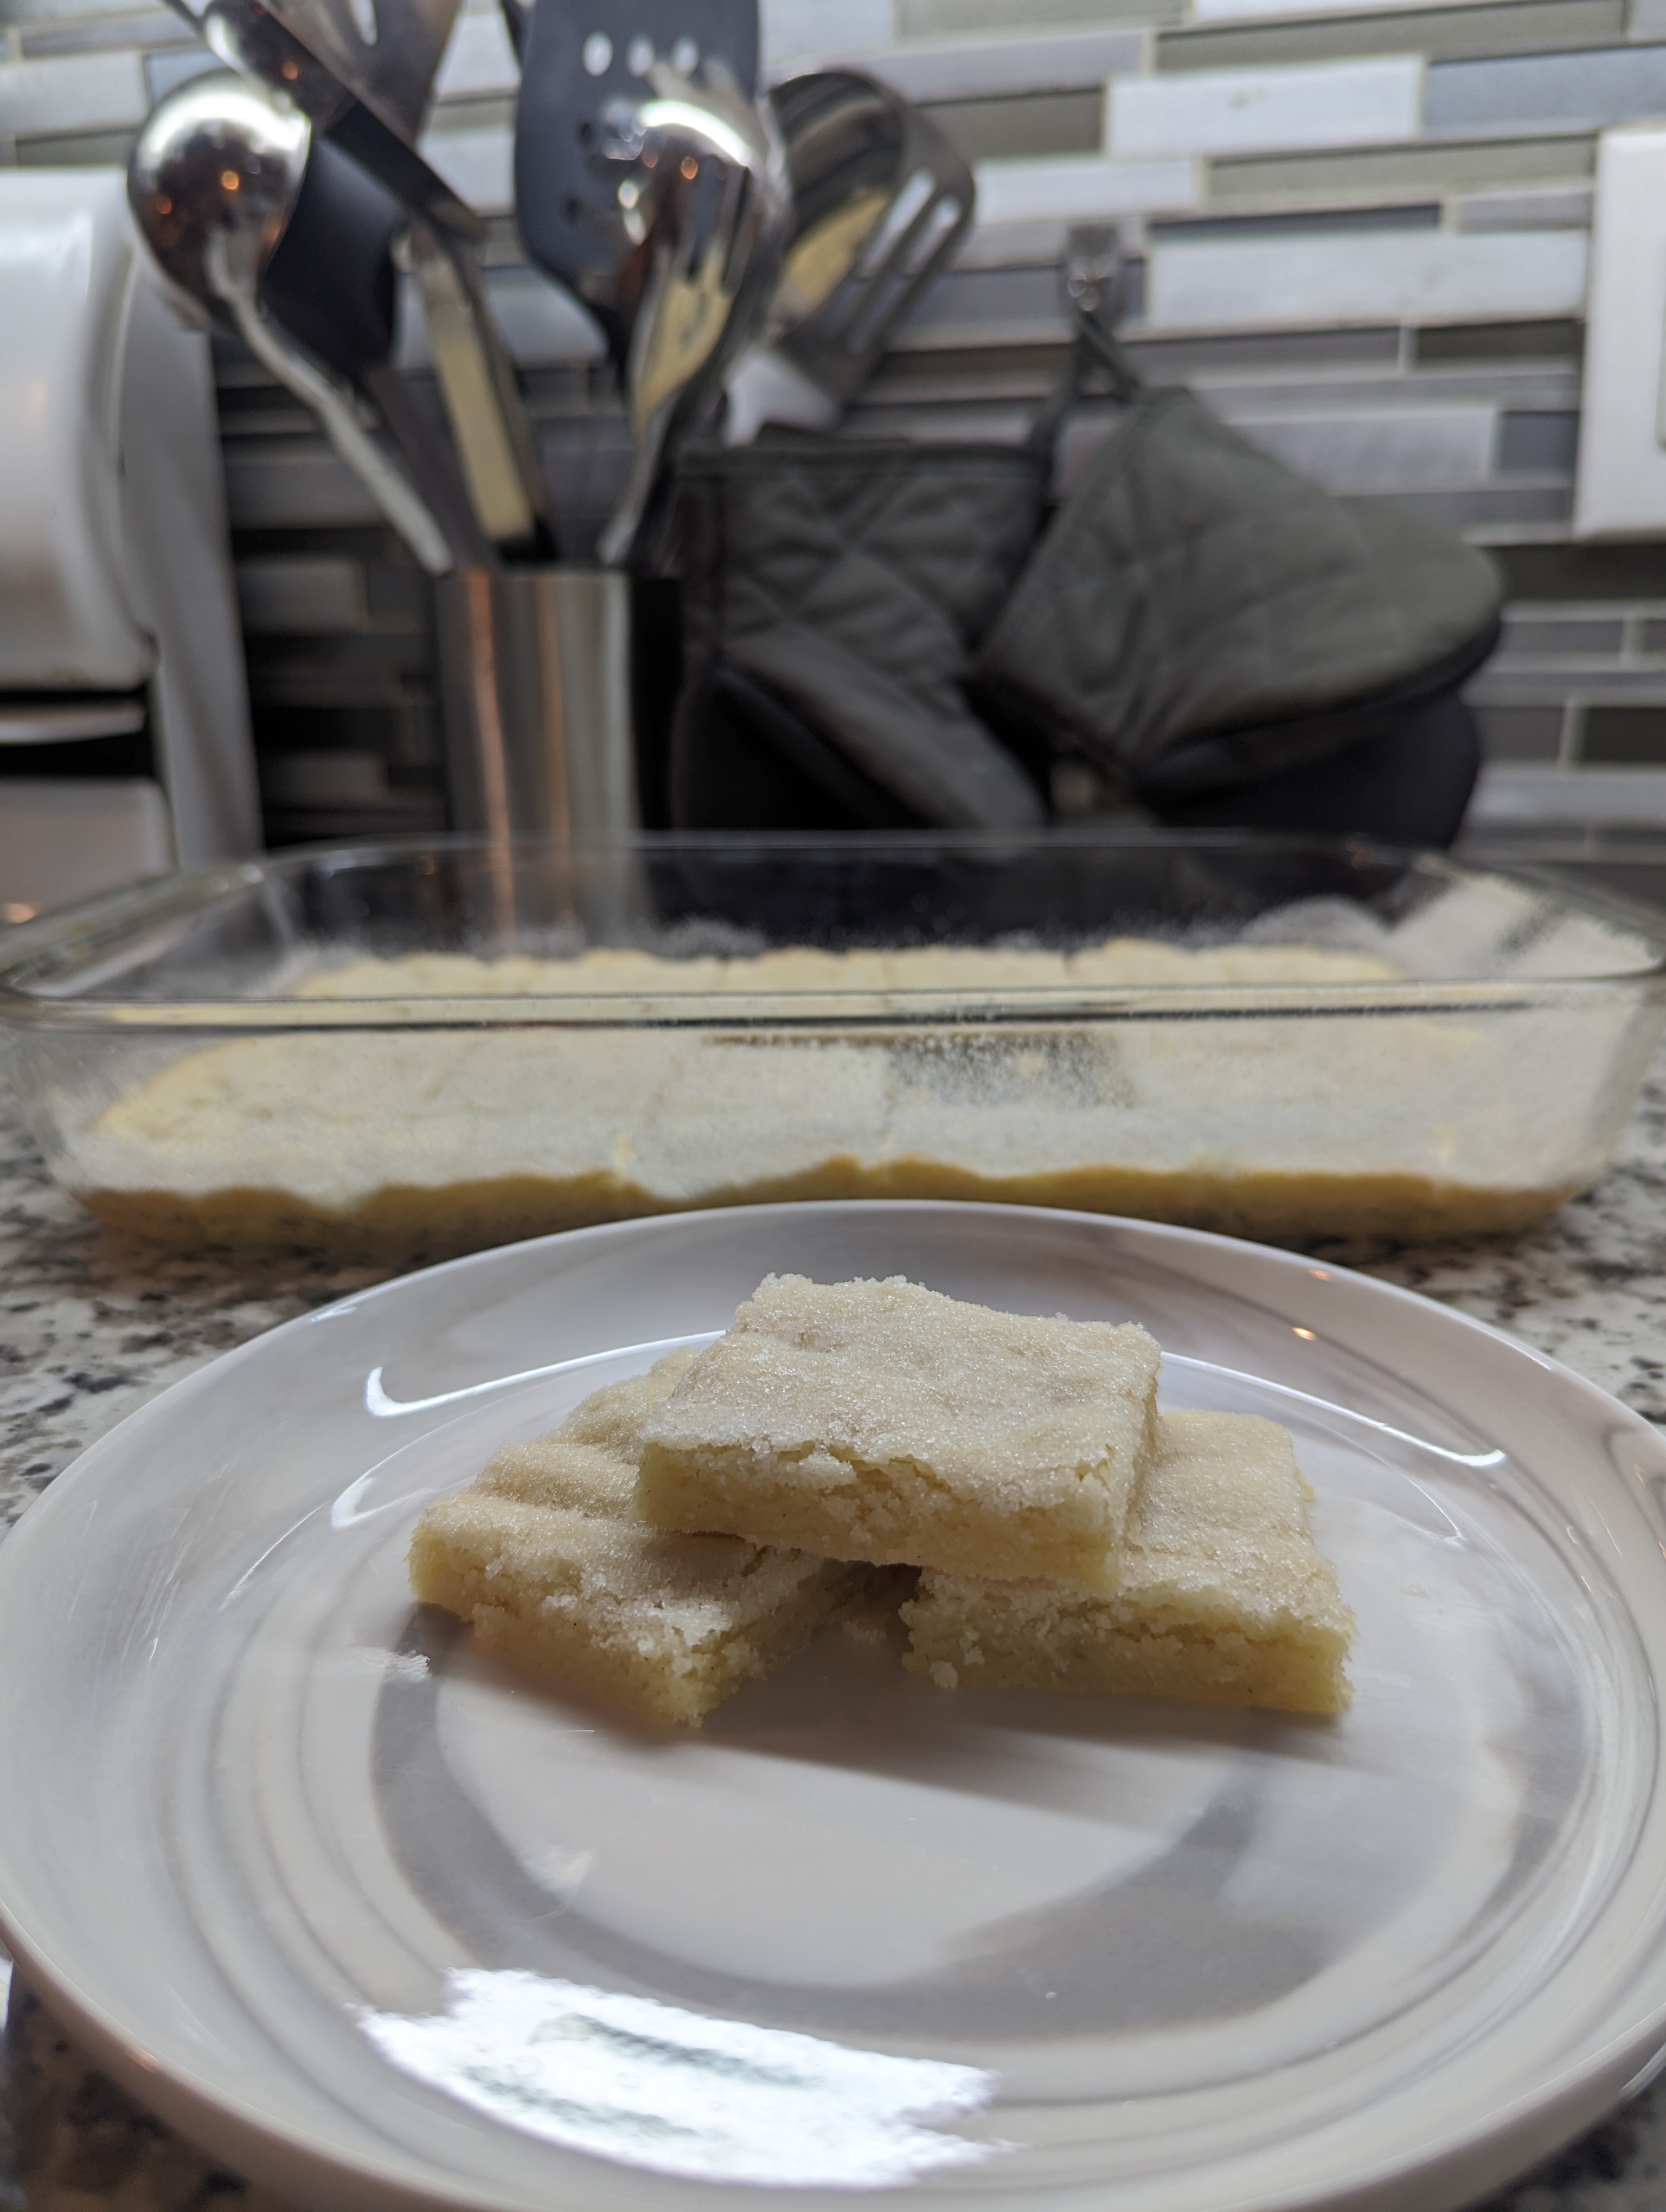 Trying out “Norwegian Christmas Butter Squares” from Tumblr